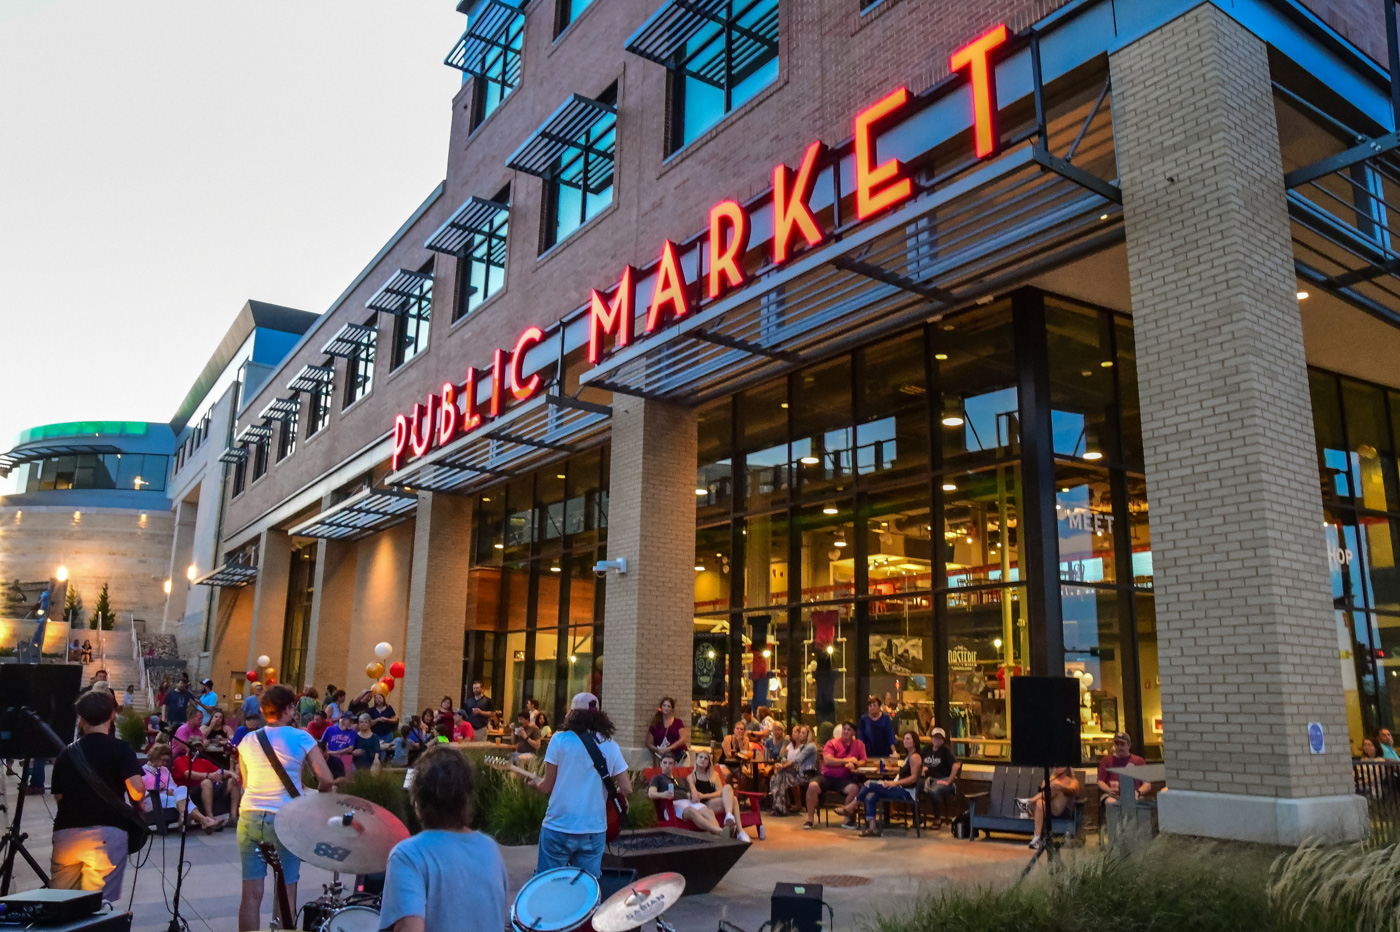 CHECK OUT THE PUBLIC MARKET Cover Photo